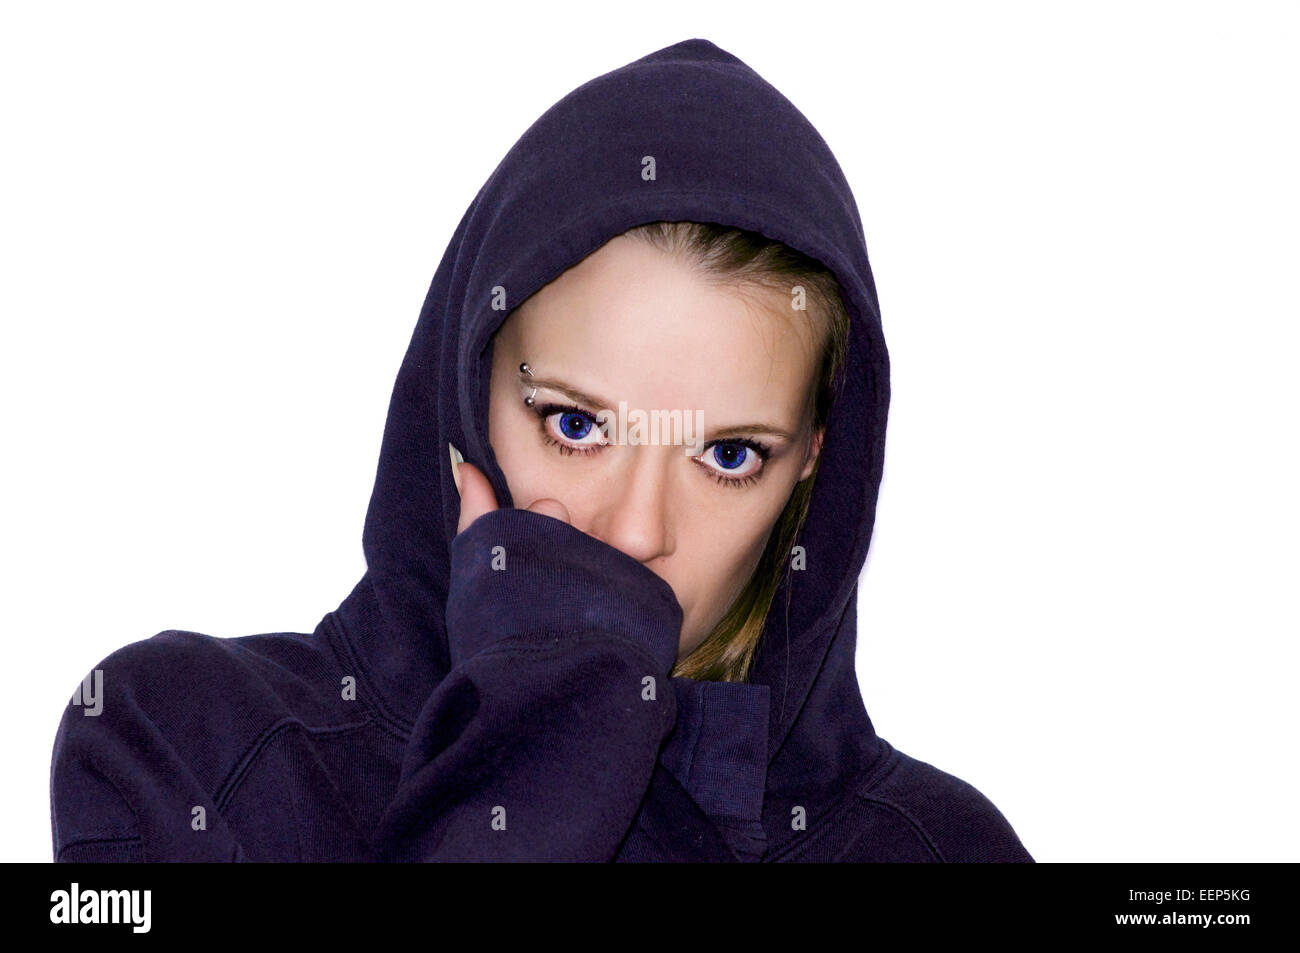 Beautiful woman portrait face concealed by her hand wearing a blue hooded sweatshirt with bright blue eyes. Stock Photo